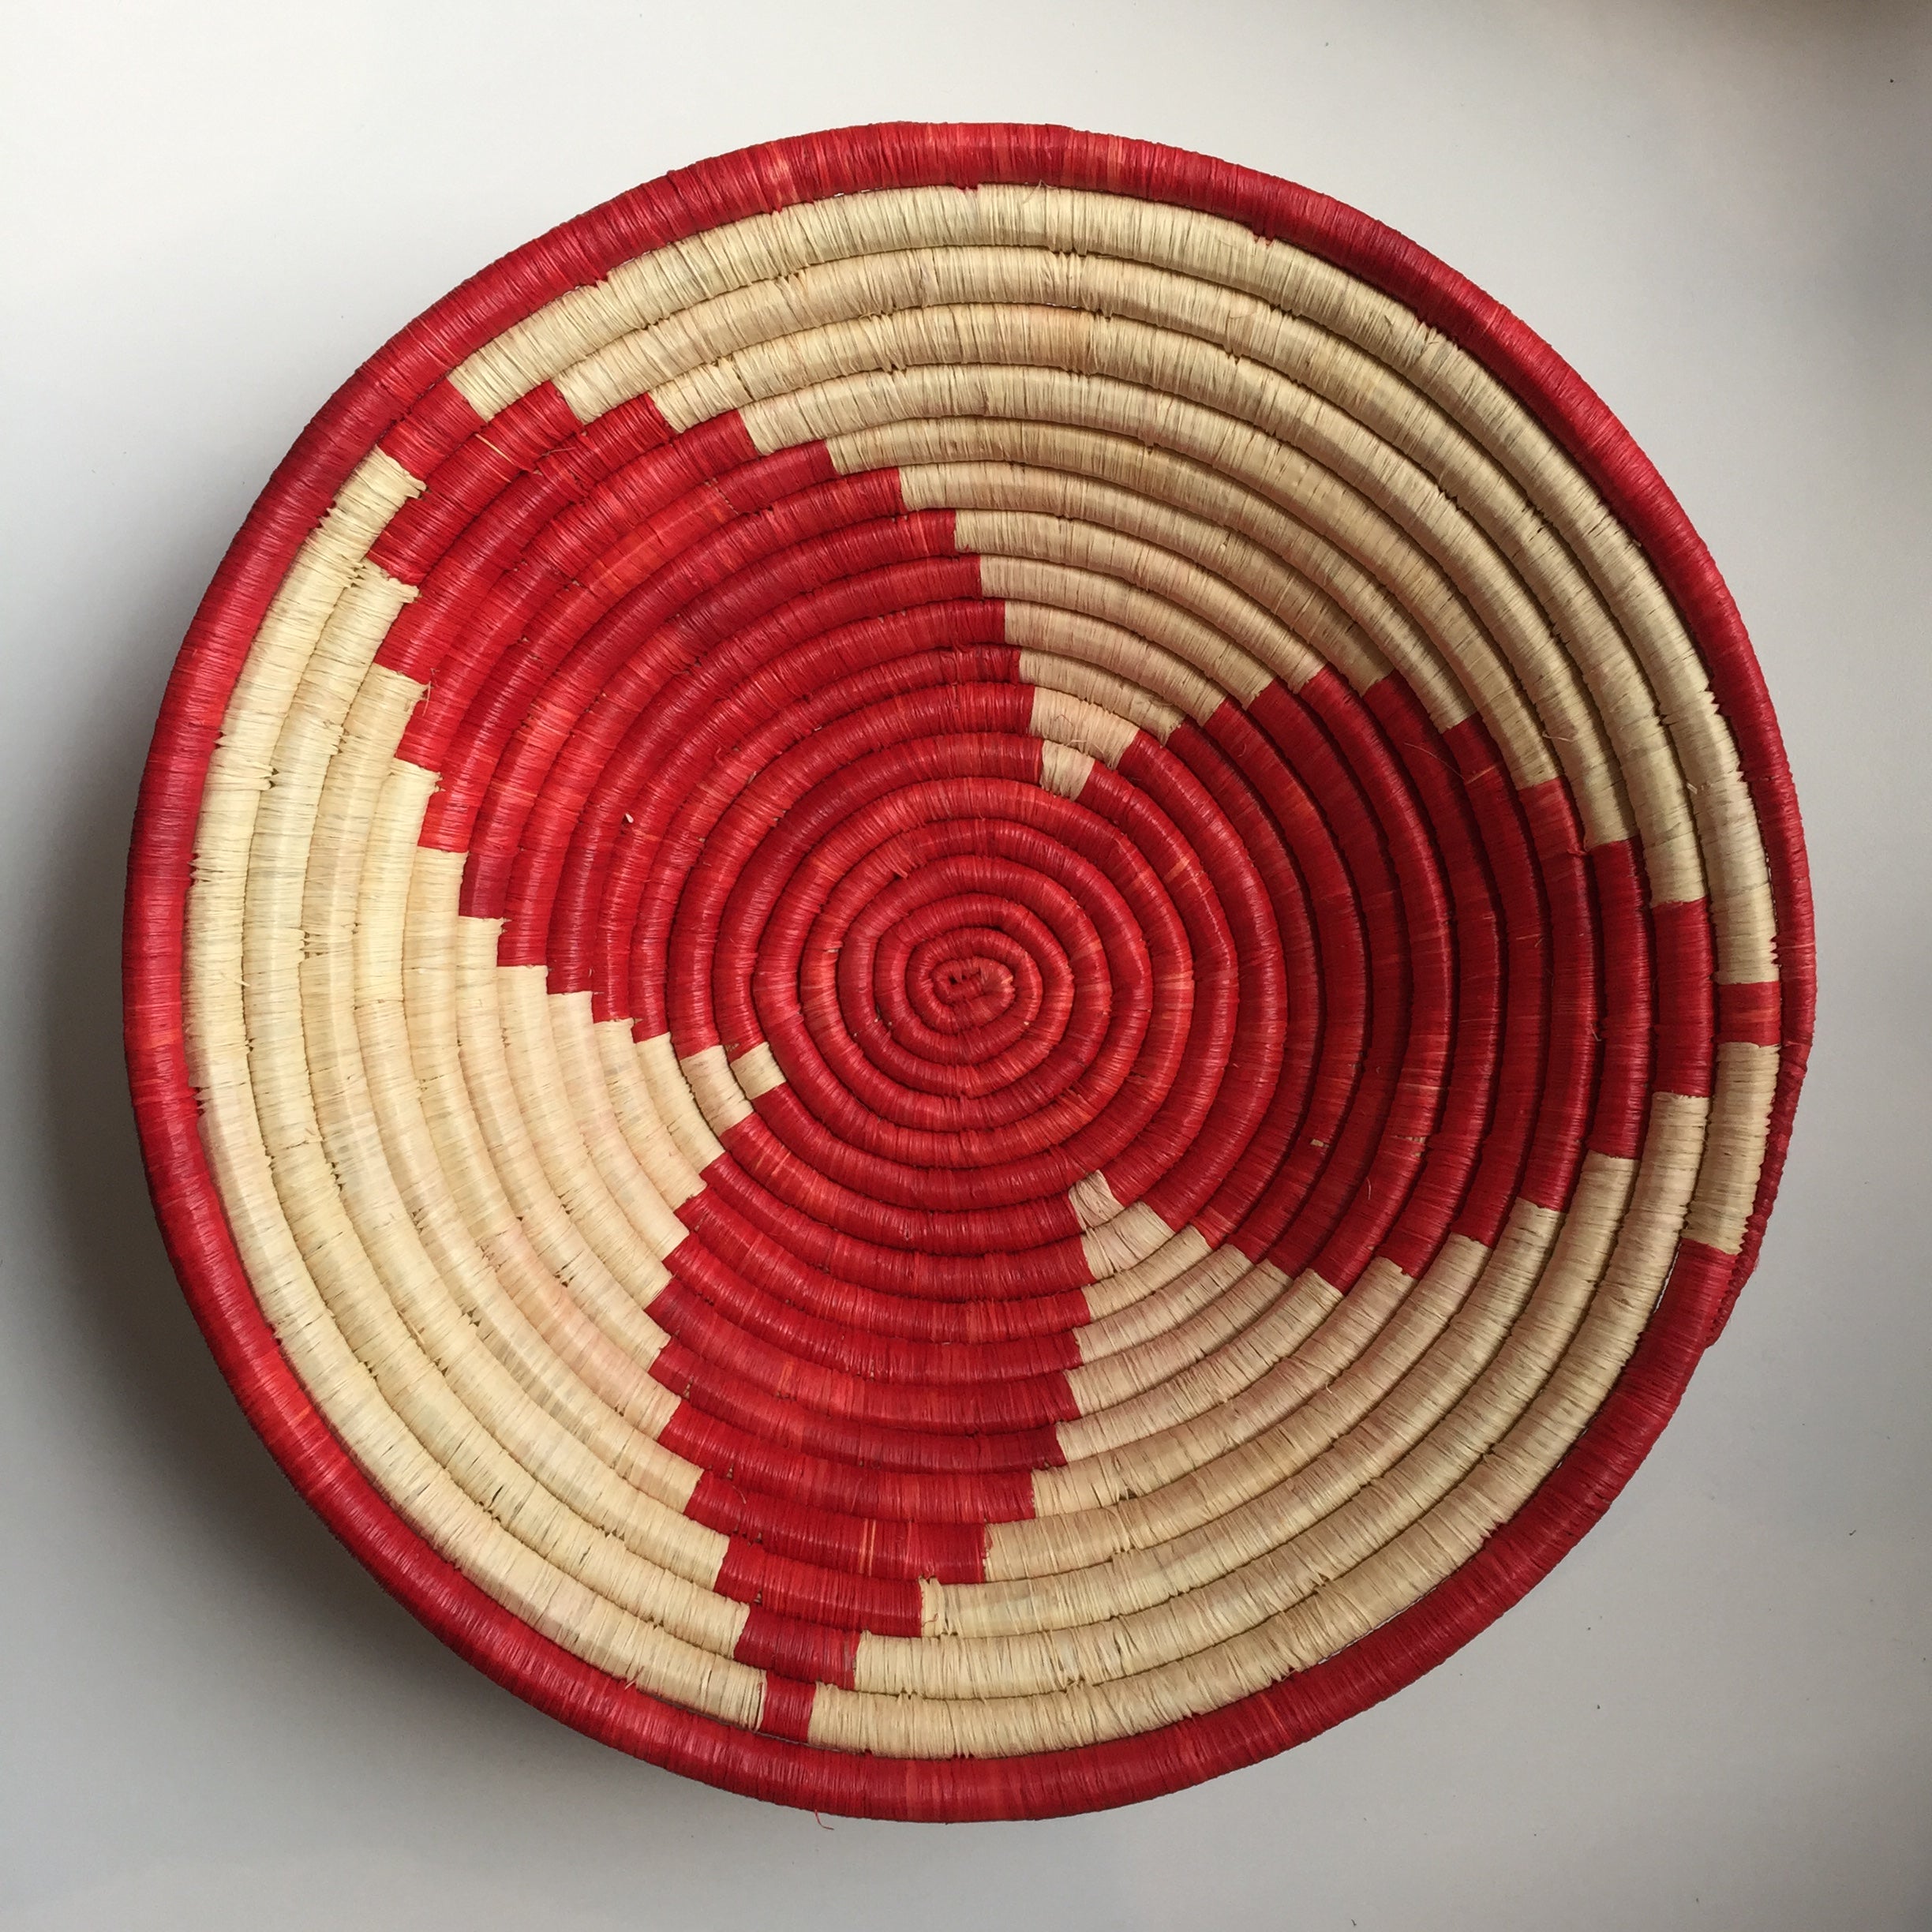 Red star woven basket